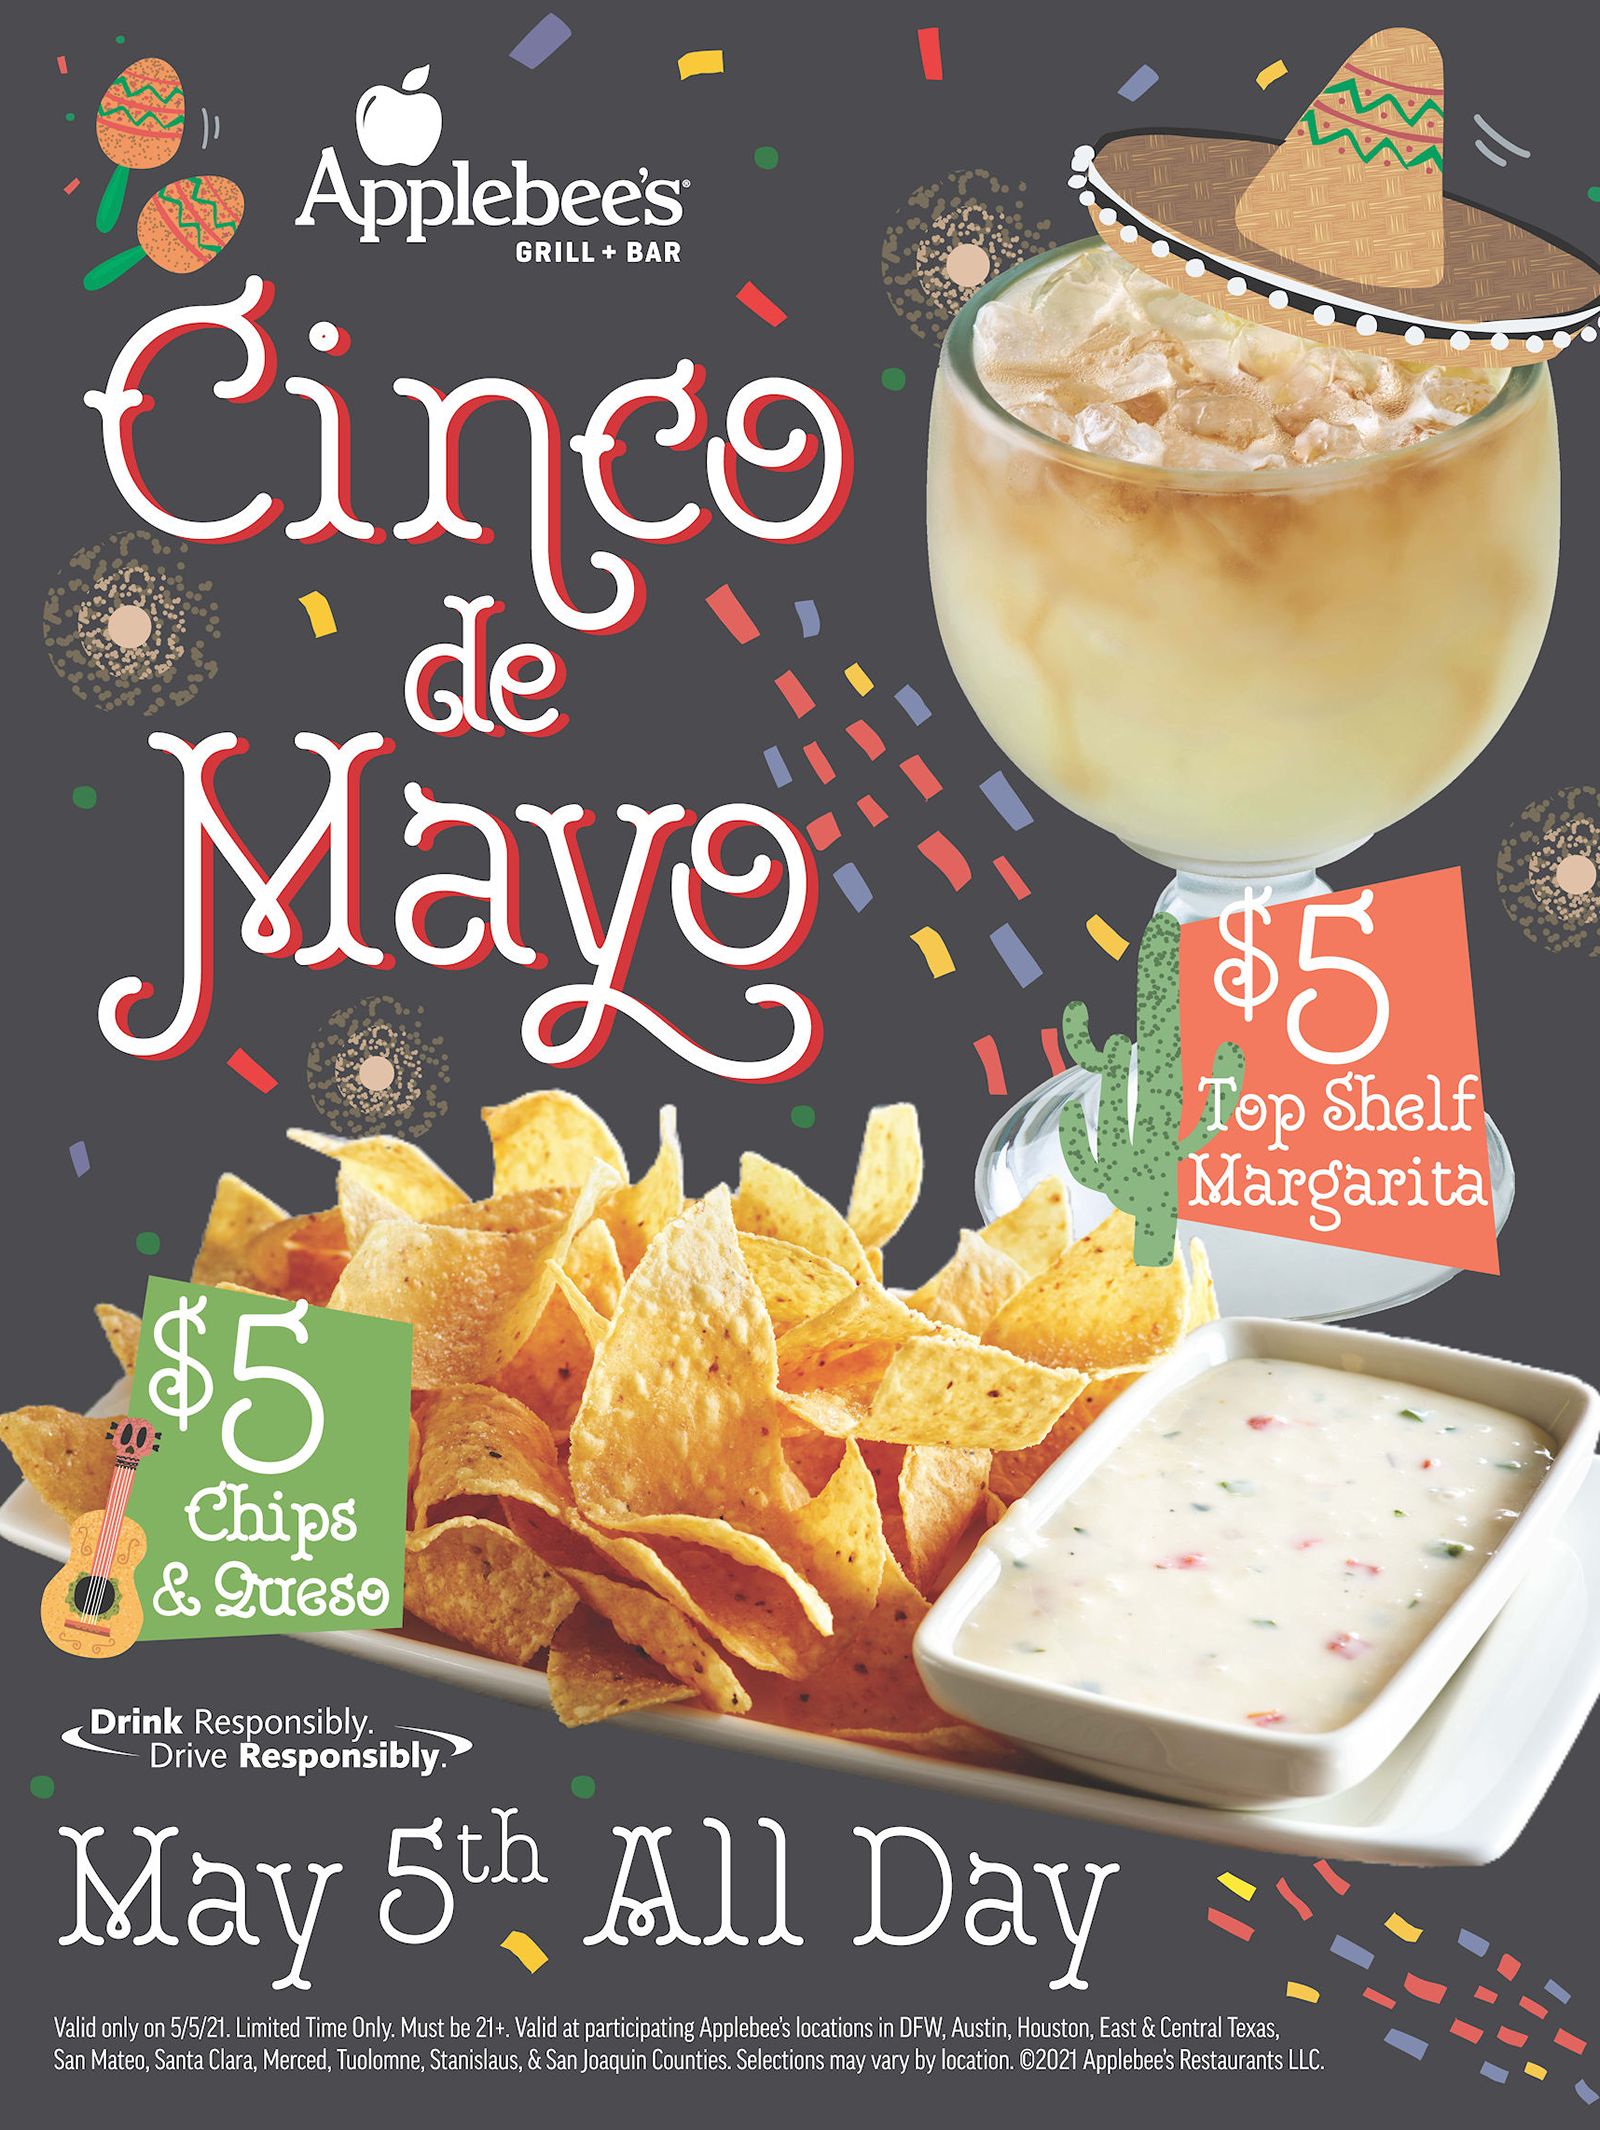 Applebee's Restaurants in the Dallas/Fort Worth Metroplex Will Feature the DOLLARITA - Margaritas for a Buck - for the Rest of May 2021